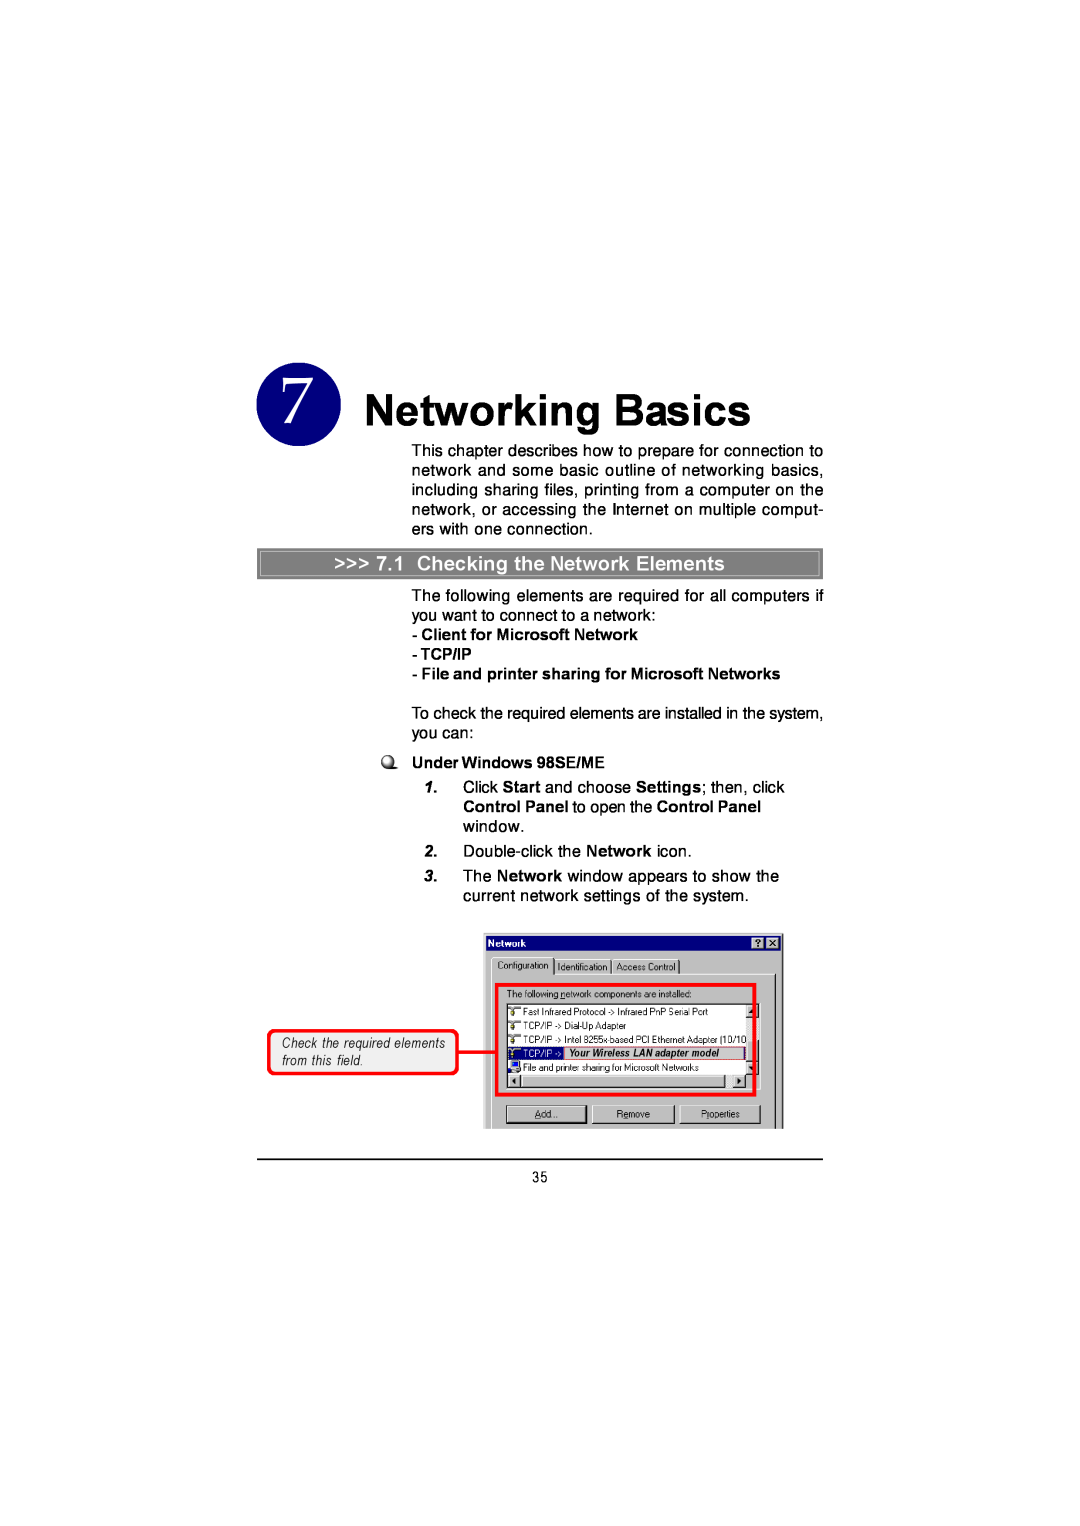 MSI US60G Networking Basics, Checking the Network Elements, Client for Microsoft Network TCP/IP, Under Windows 98SE/ME 